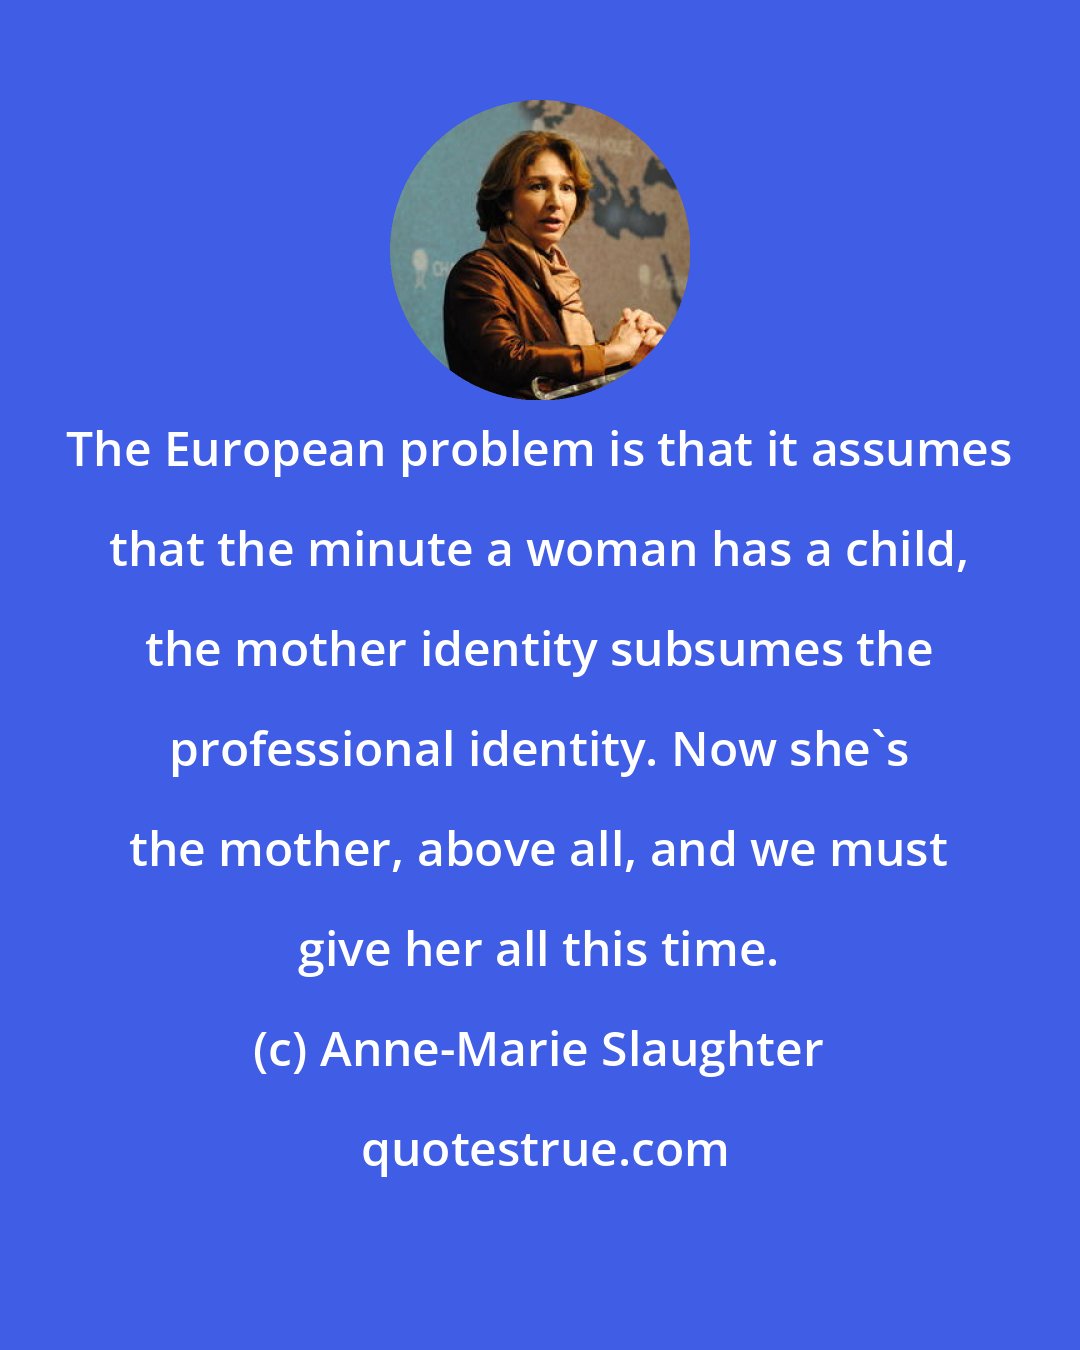 Anne-Marie Slaughter: The European problem is that it assumes that the minute a woman has a child, the mother identity subsumes the professional identity. Now she's the mother, above all, and we must give her all this time.